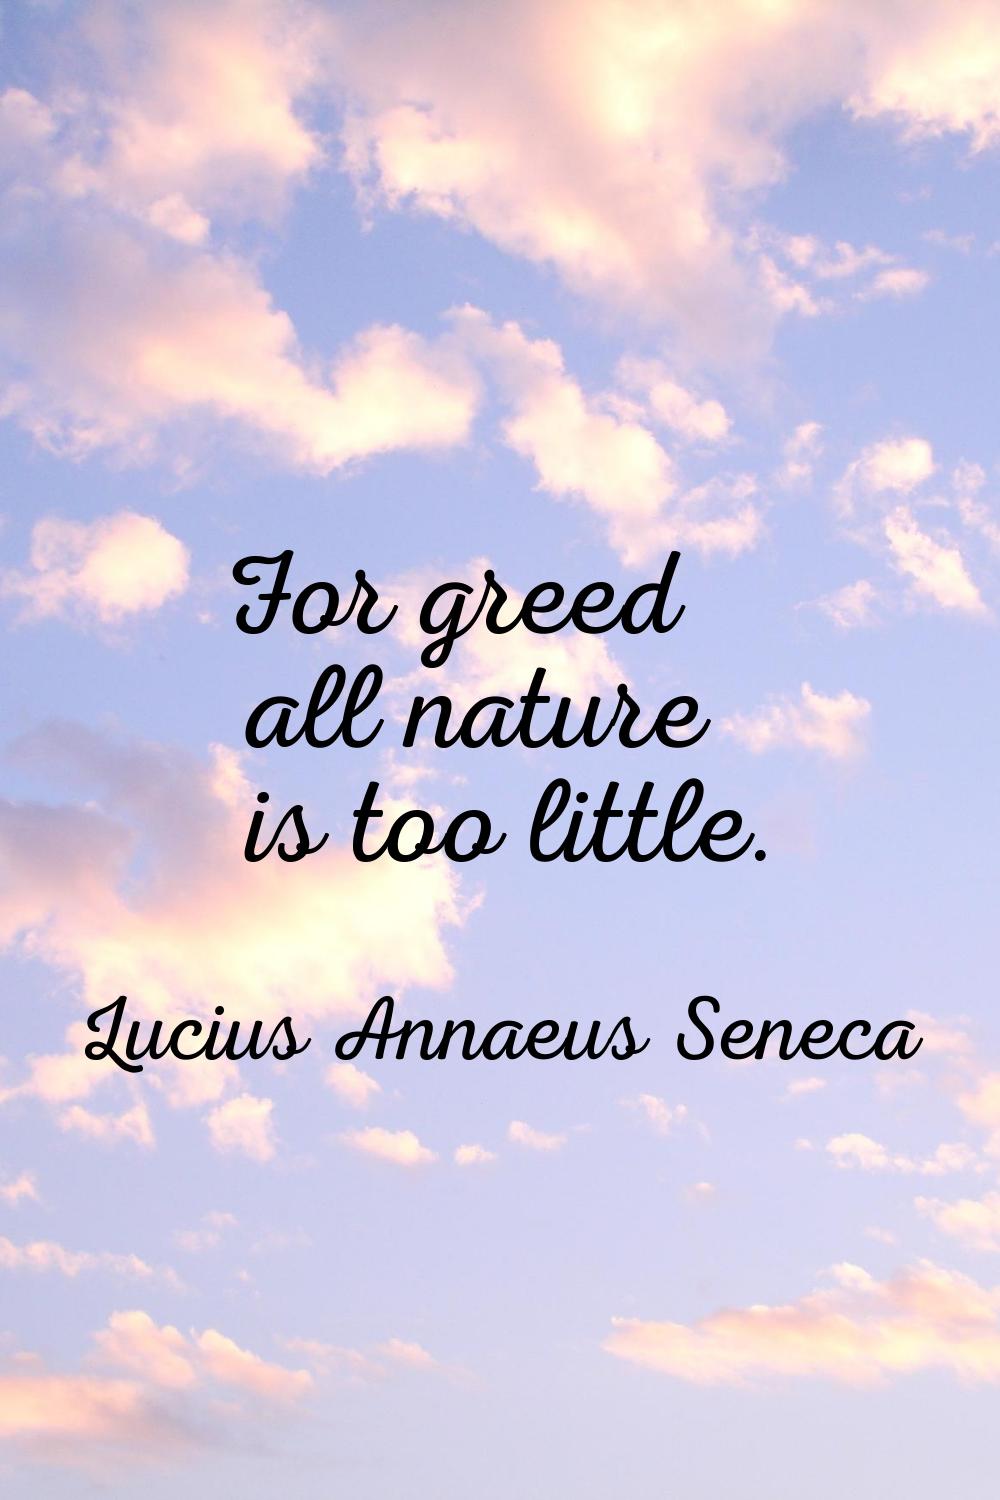 For greed all nature is too little.